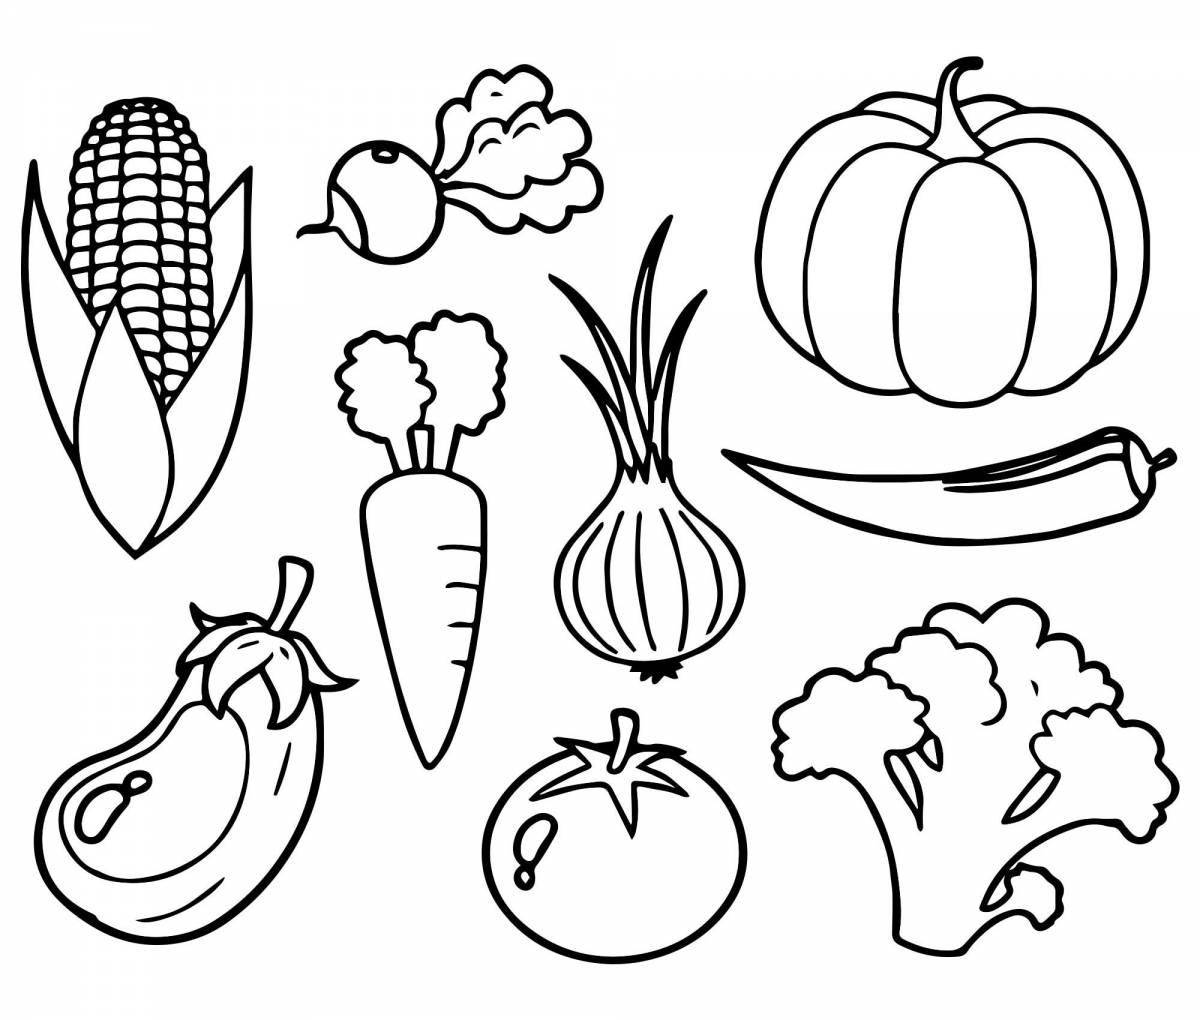 Fun and colorful vegetable coloring for kids